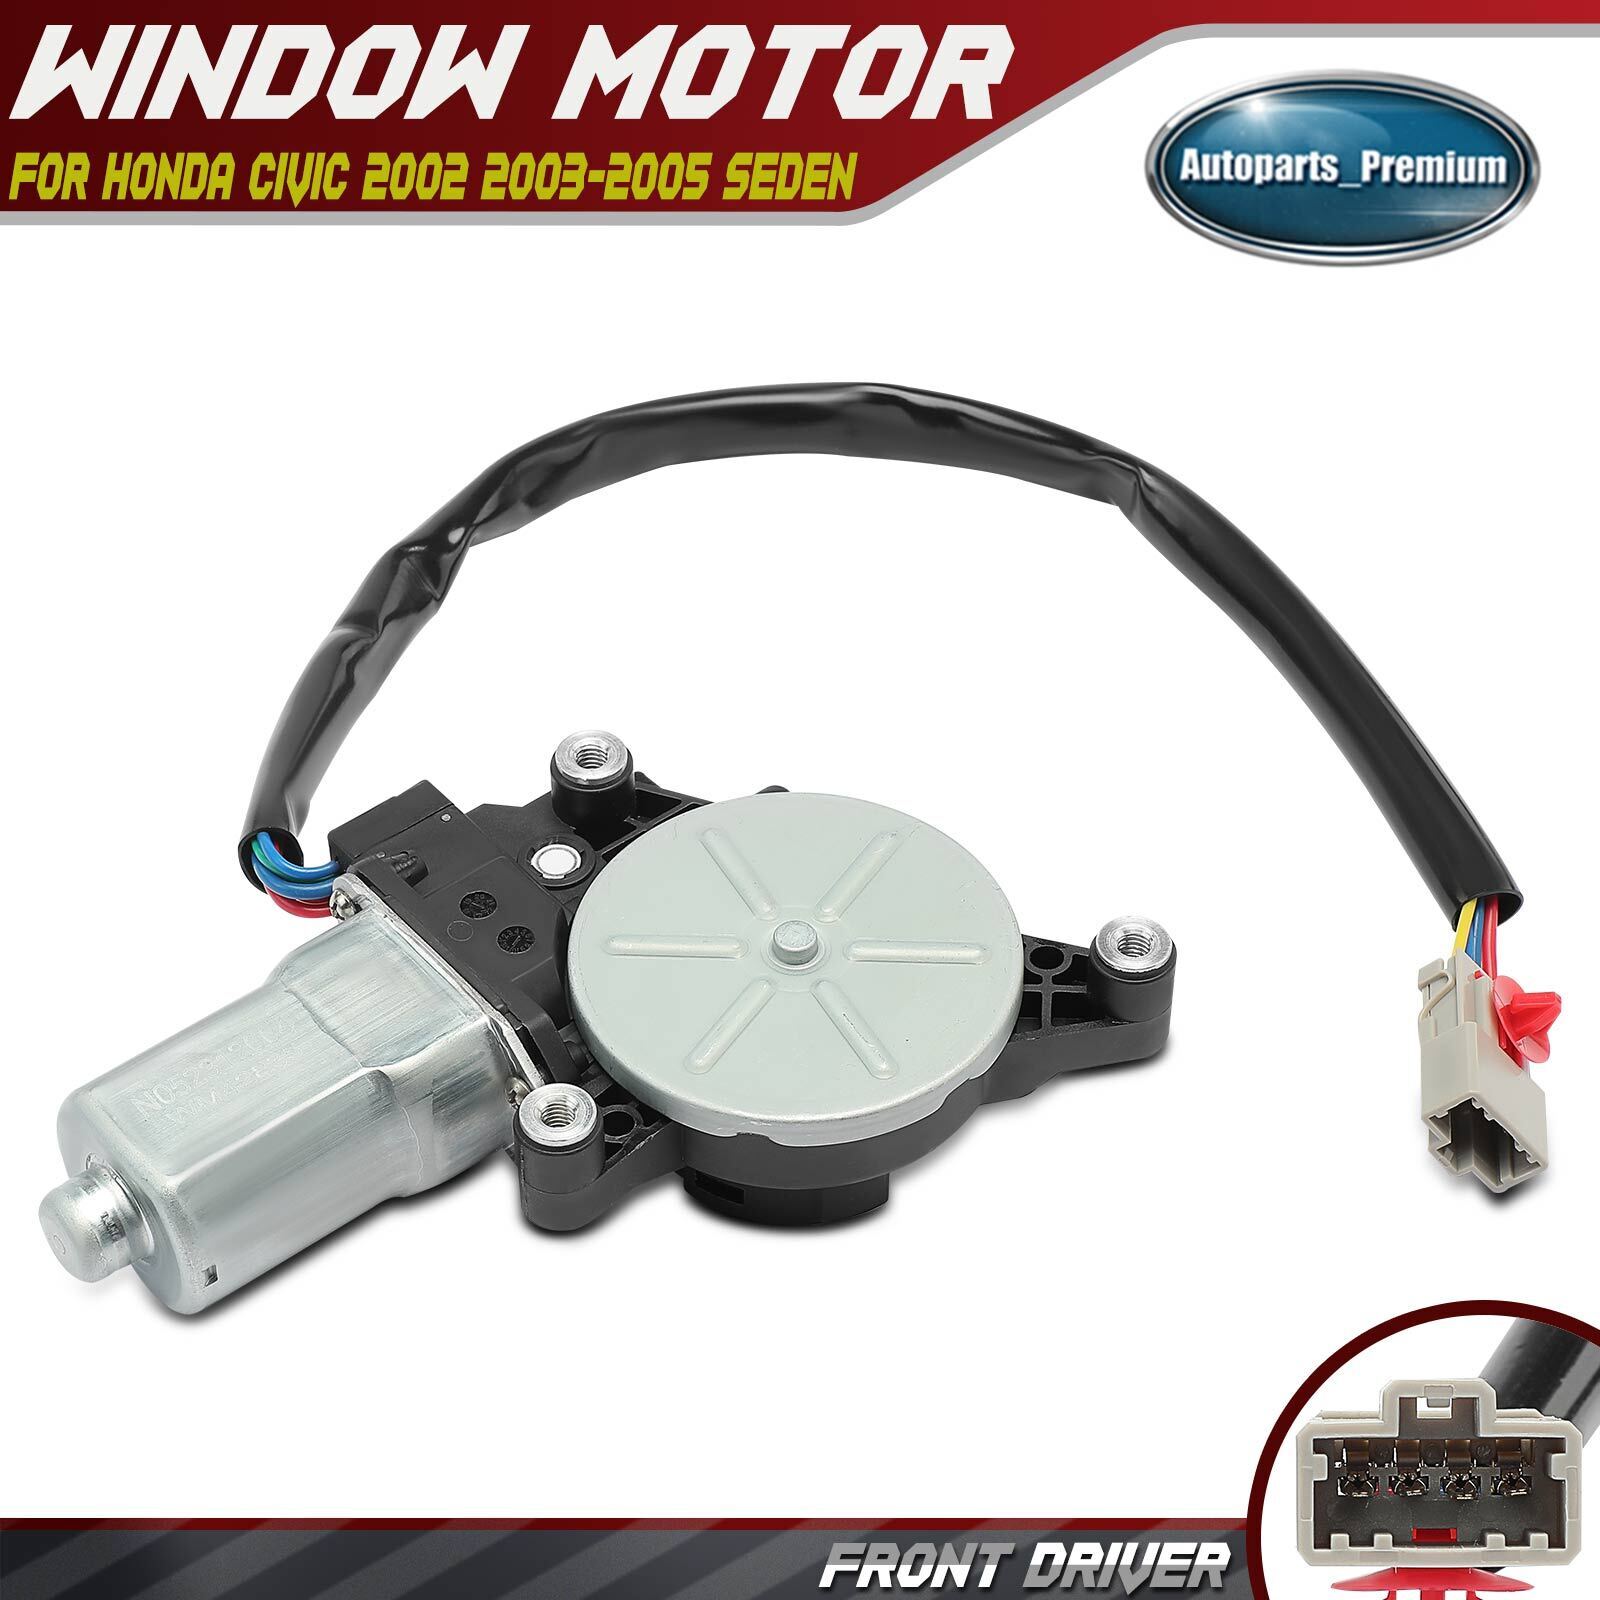 Front Driver Left Power Window Motor with 4-Pins for Honda Civic 2002-2005 Seden